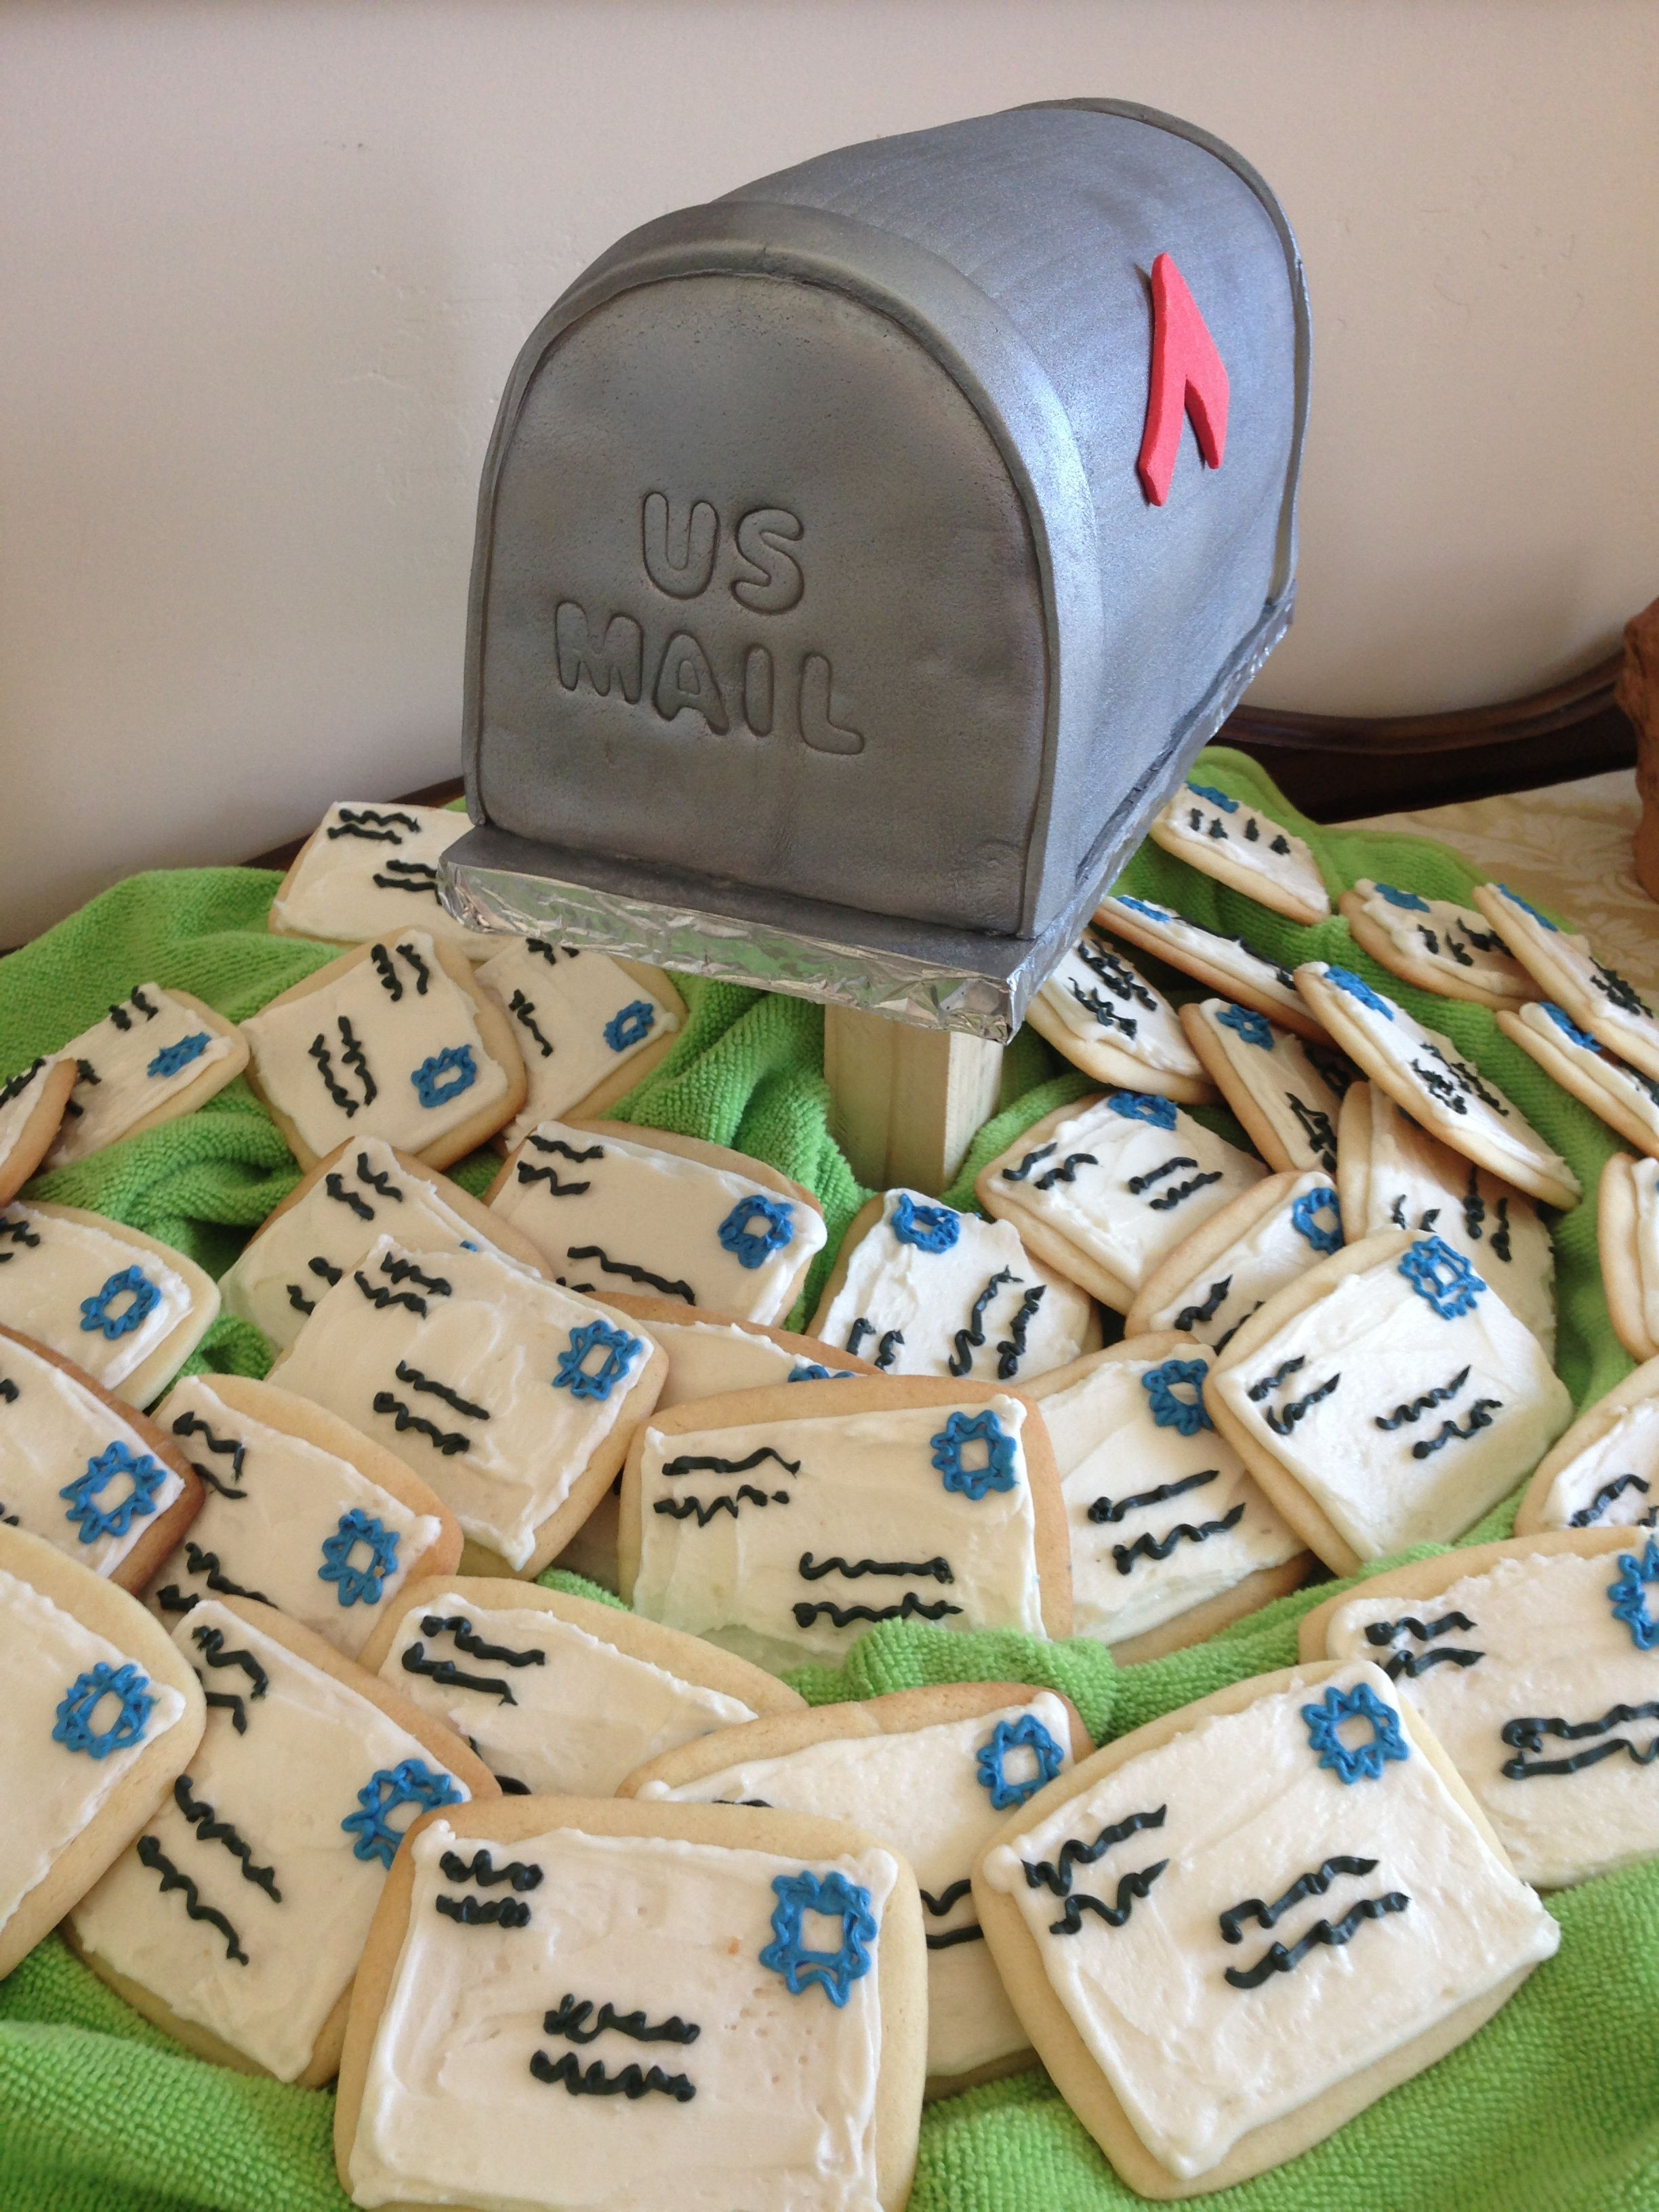 Post Office Retirement Party Ideas
 Dads post office retirement cake and cookies Used spray